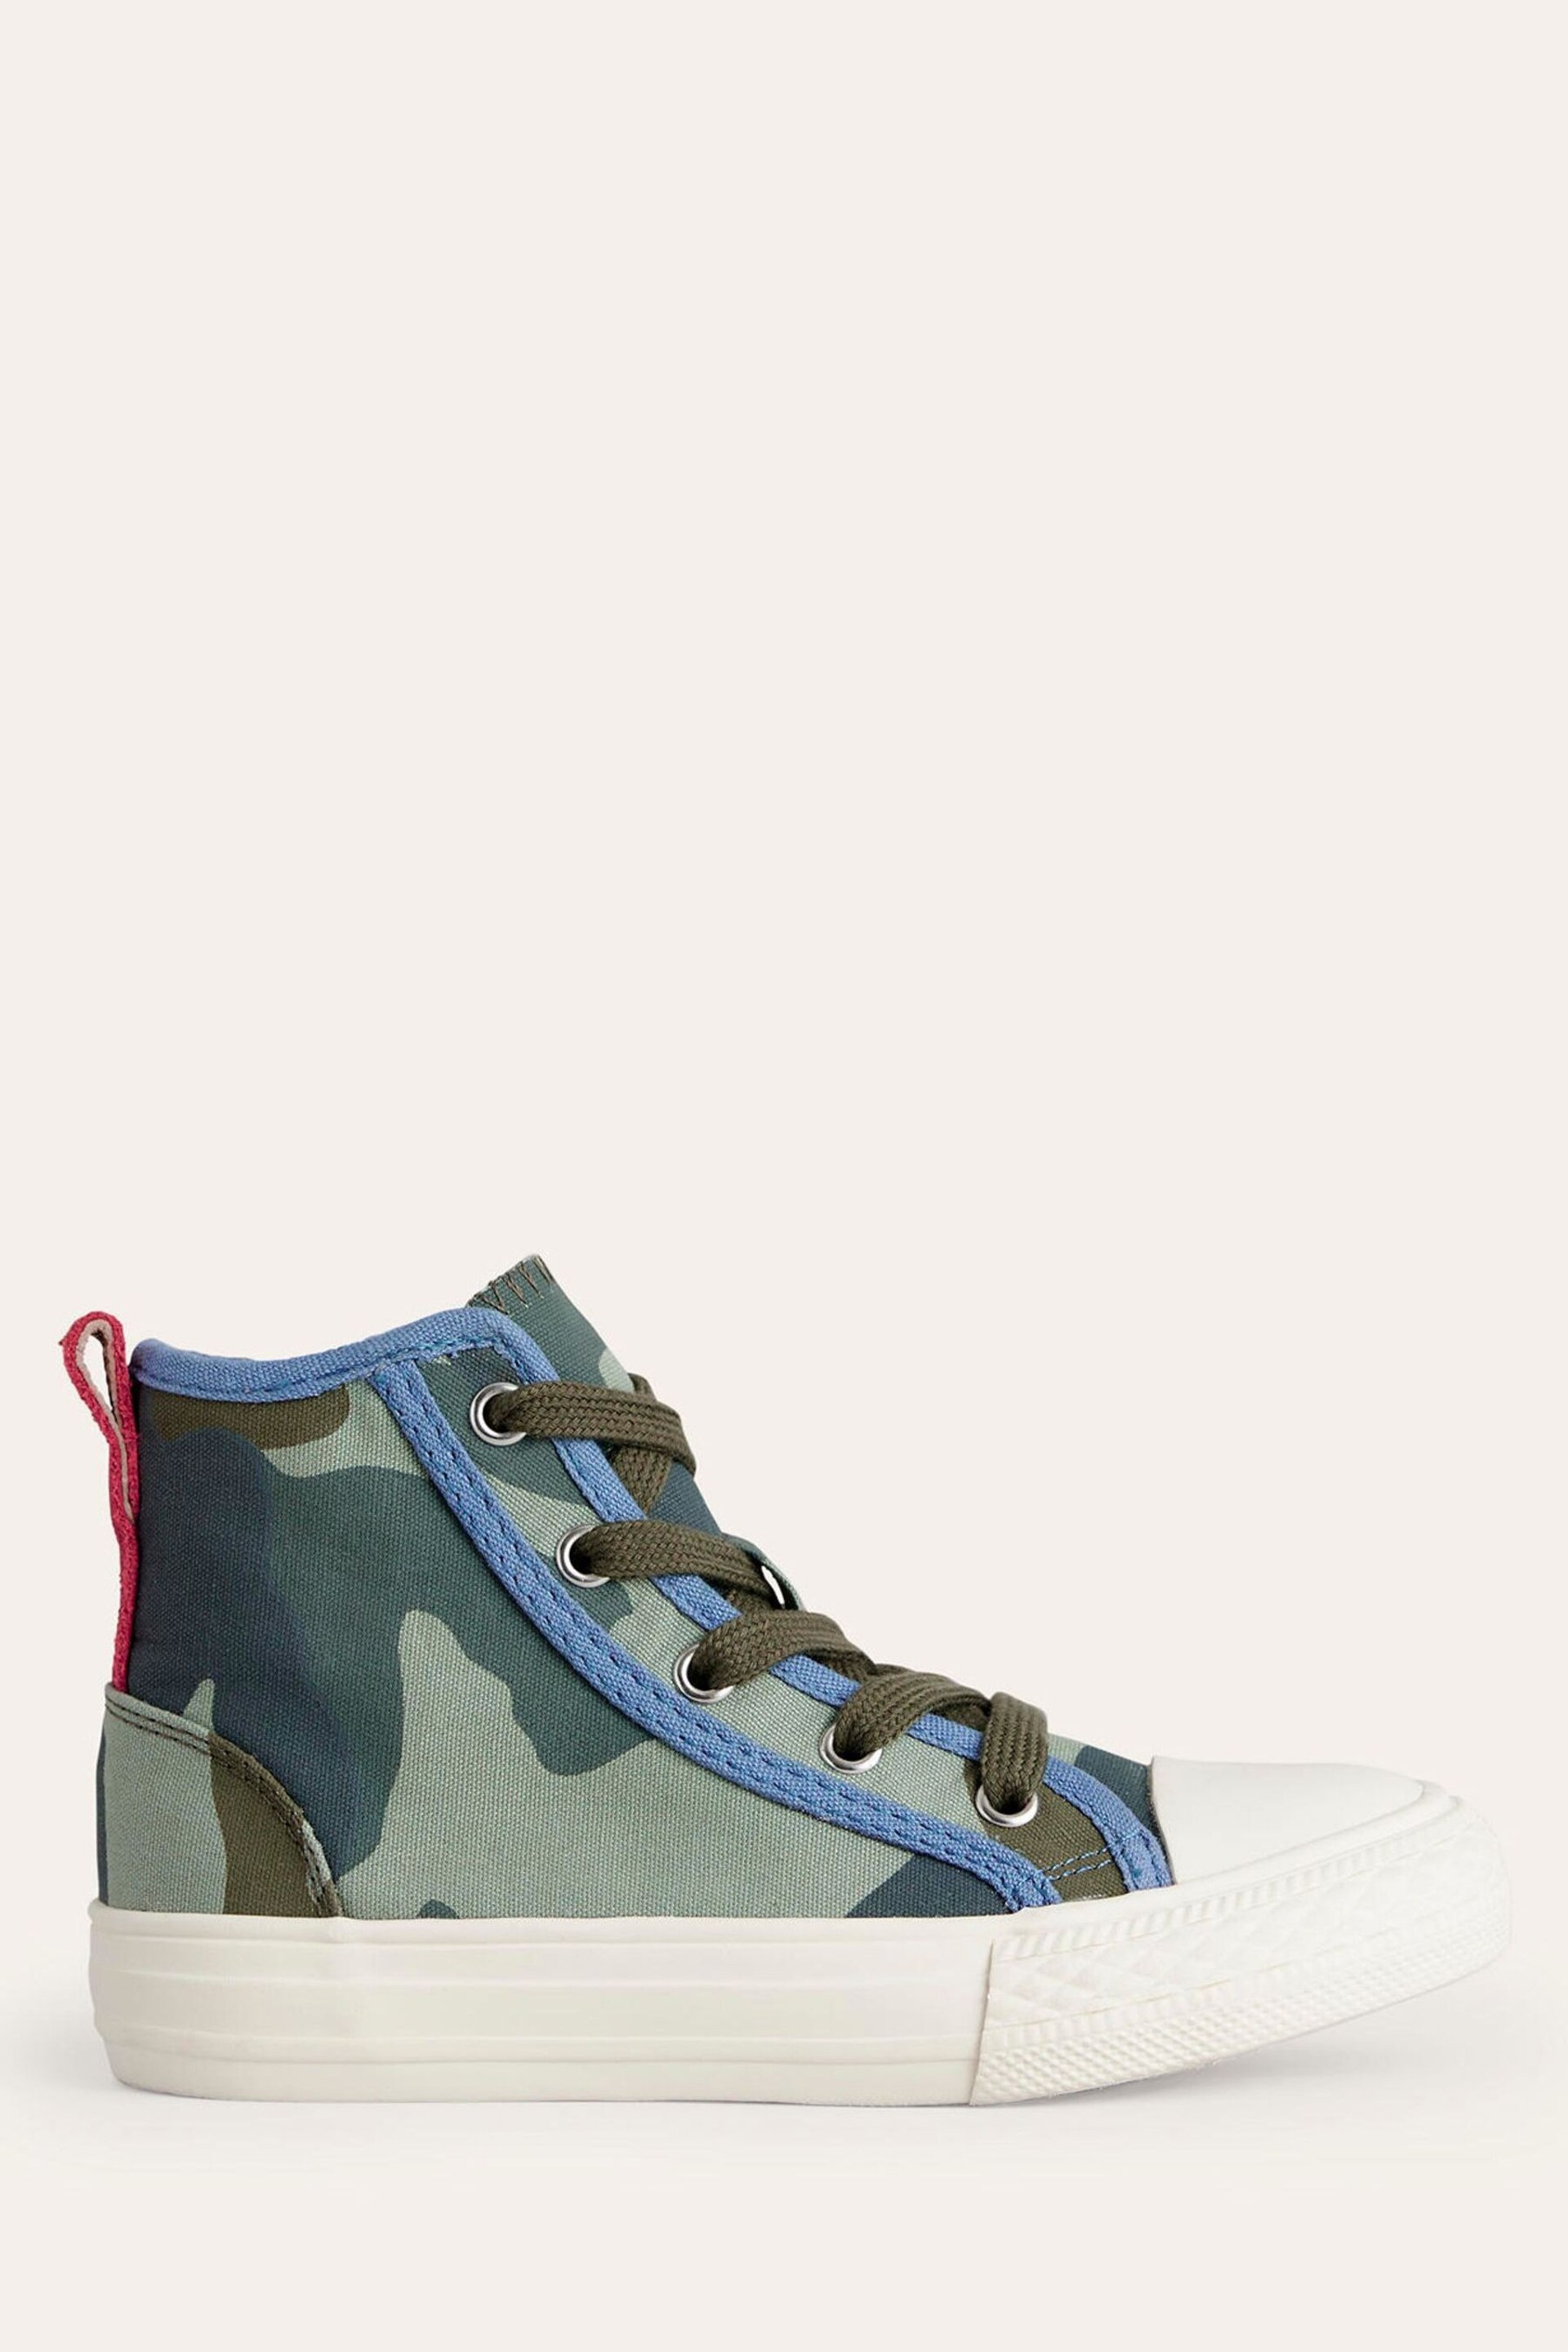 Boden Green Canvas High Top - Image 1 of 3